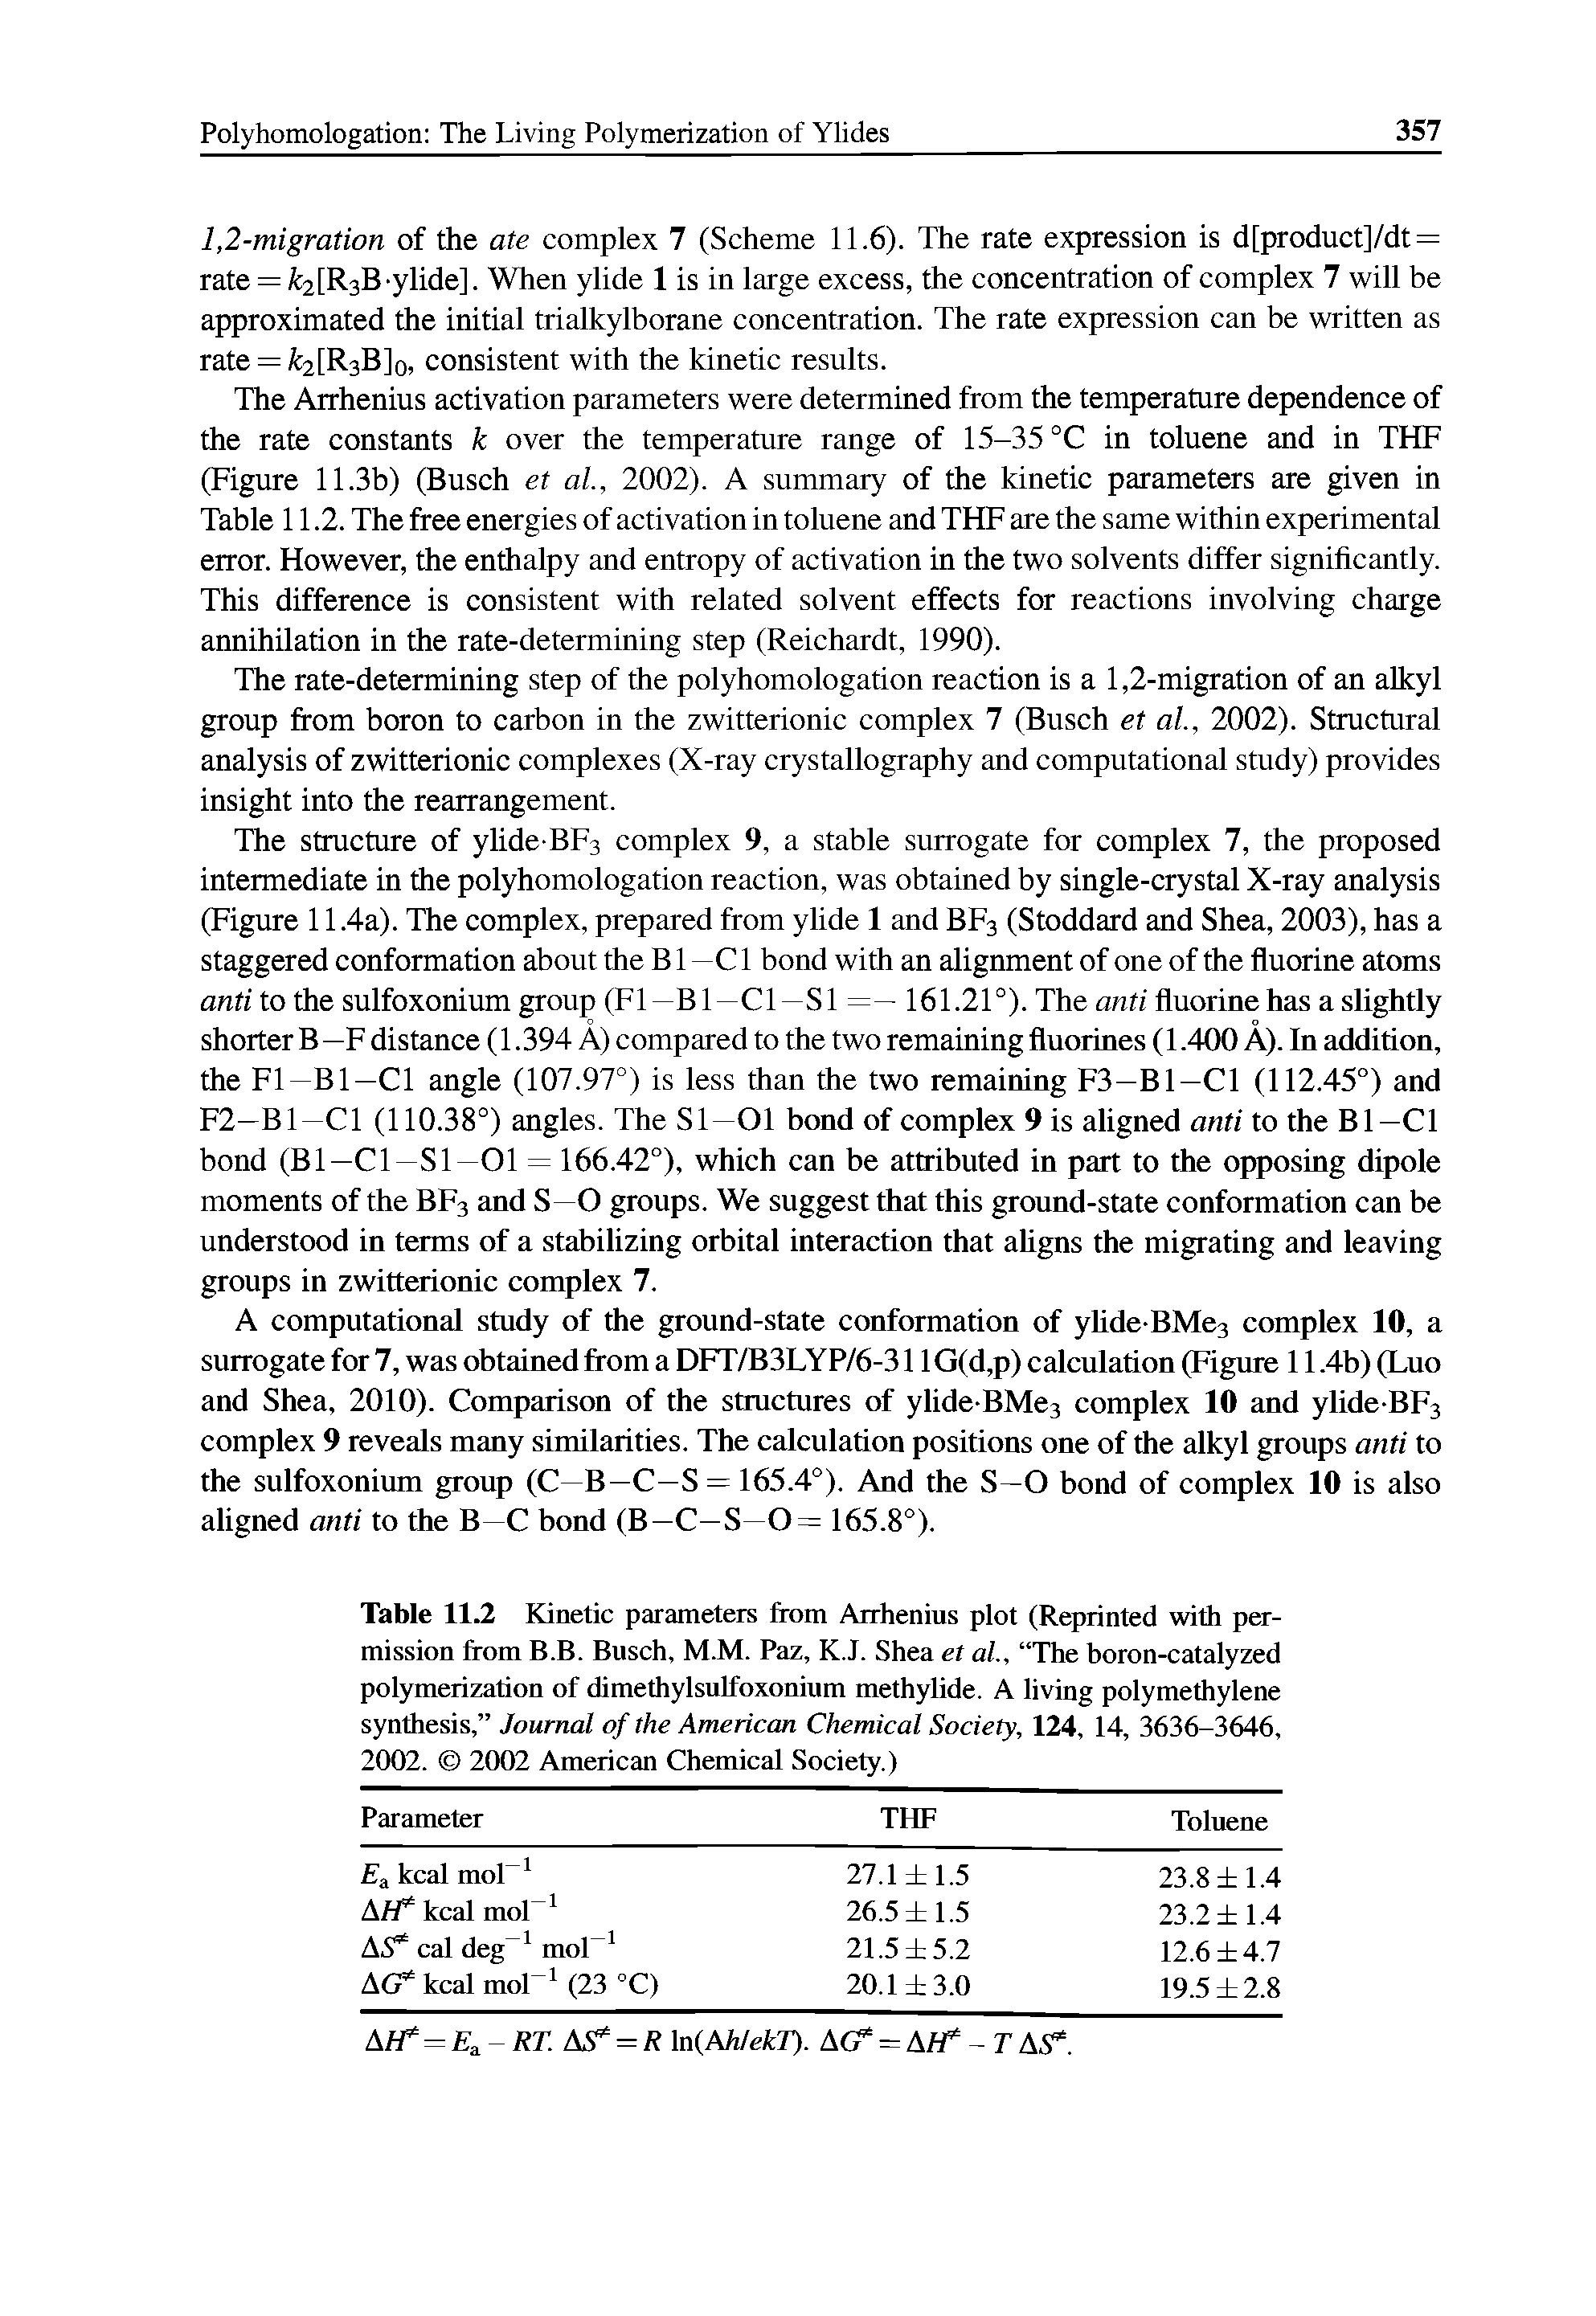 Table 11.2 Kinetic parameters from Arrhenius plot (Reprinted with permission from B.B. Busch, M.M. Paz, K.J. Shea et al., The boron-catalyzed polymerization of dimethylsulfoxonium methylide. A living polymethylene synthesis, Journal of the American Chemical Society, 124, 14, 3636-3646, 2002. 2002 American Chemical Society.)...